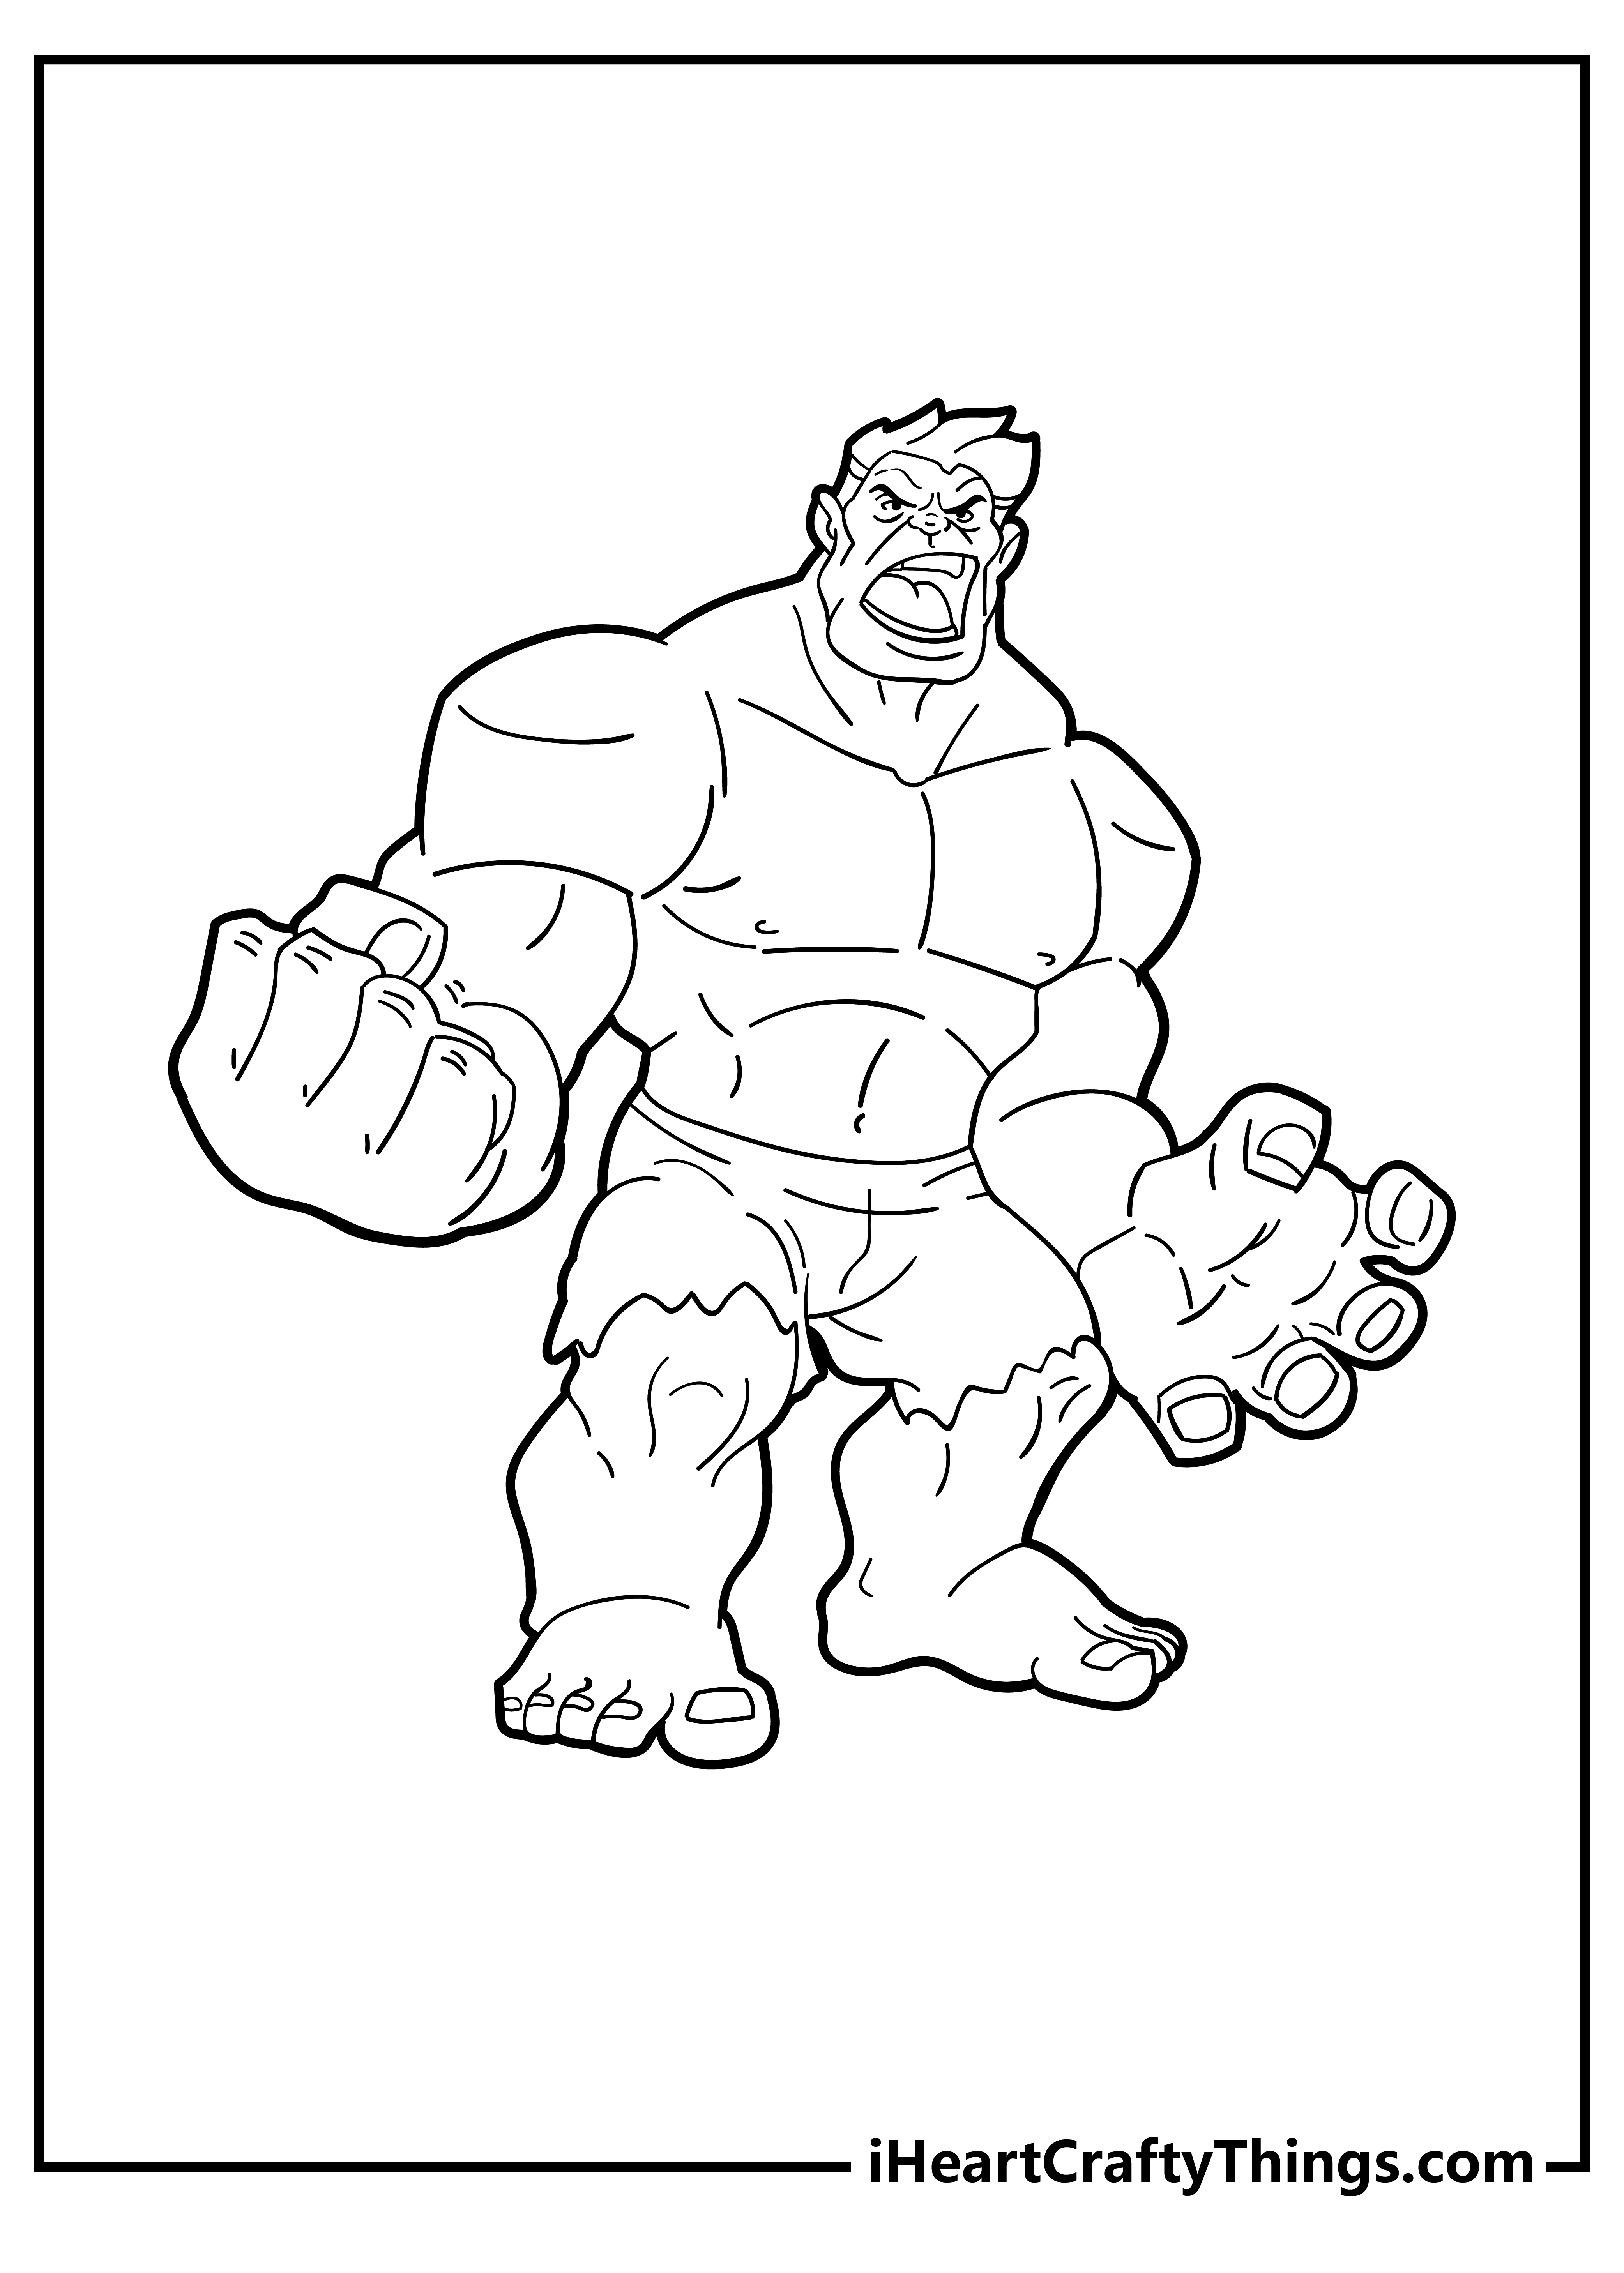 Hulk Coloring Pages for preschoolers free printable